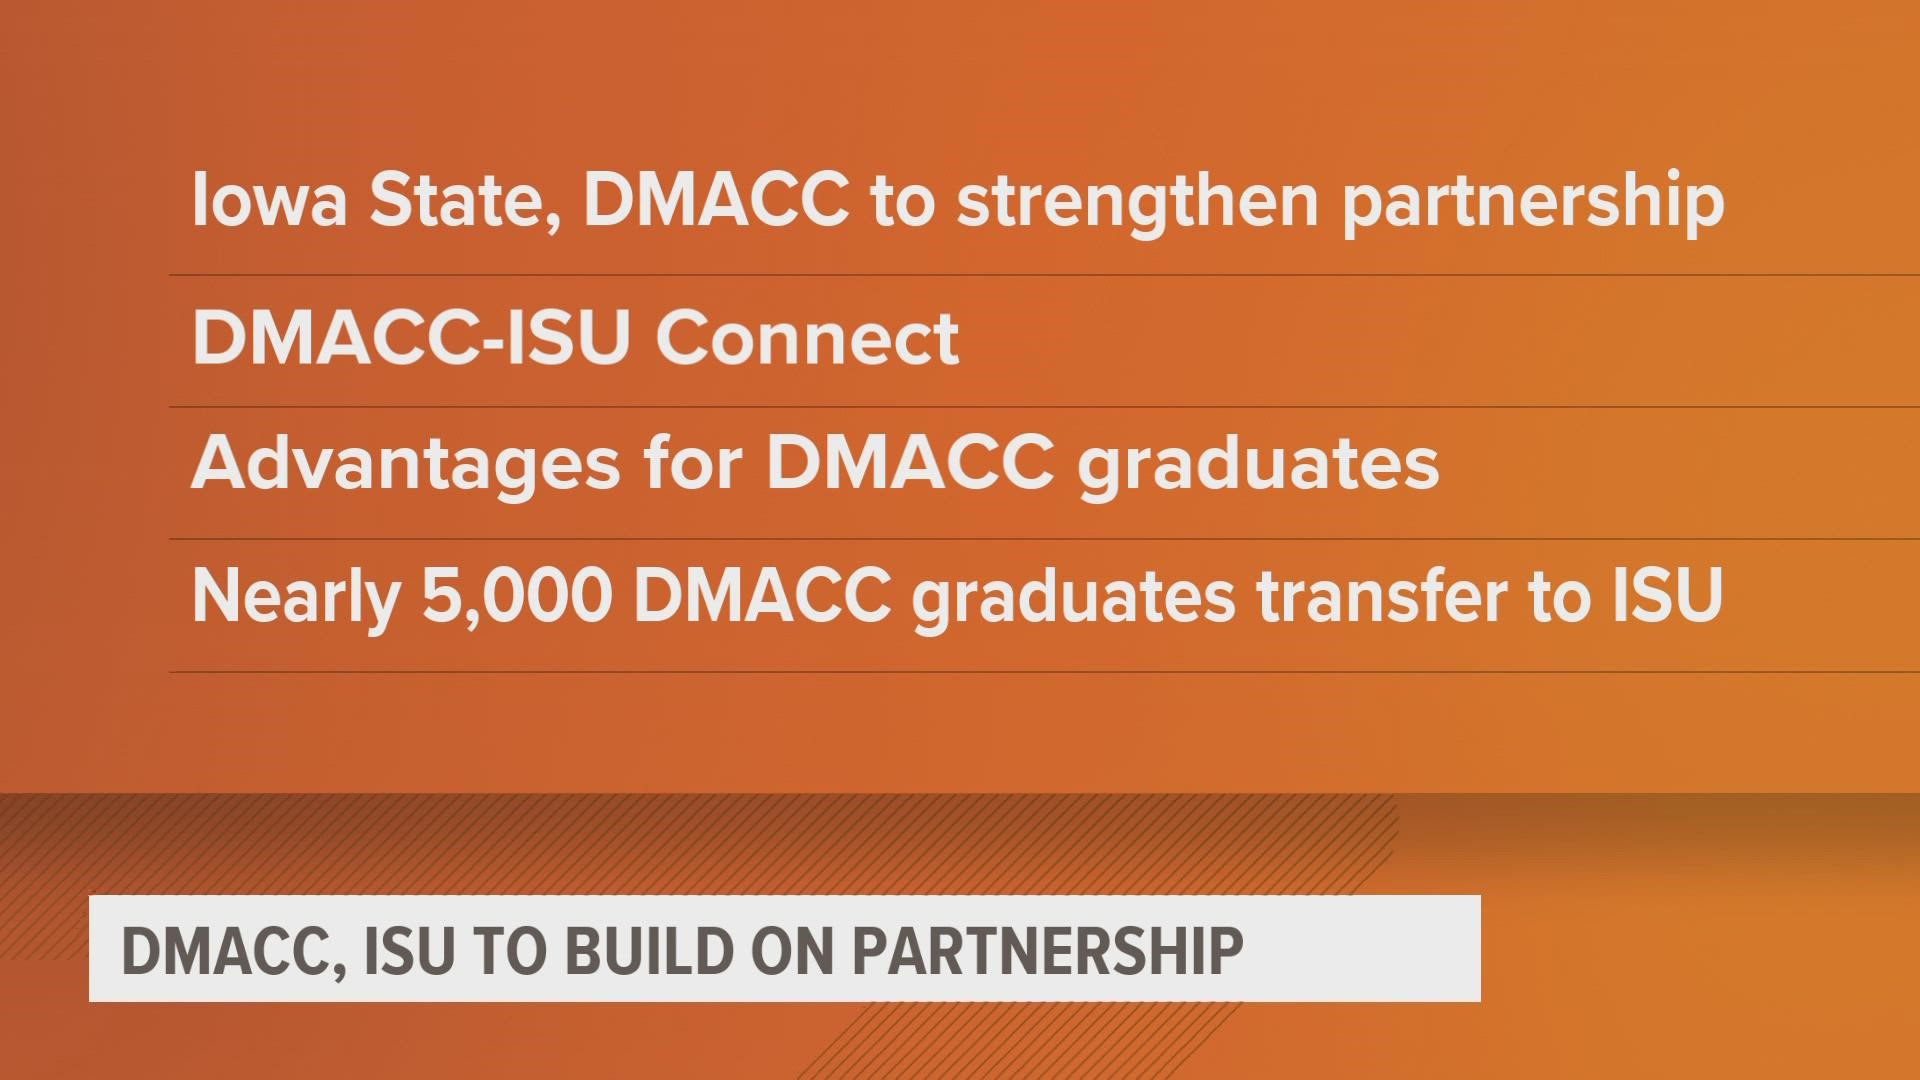 Nearly 5,000 DMACC graduates transfer to Iowa State University to complete their education.